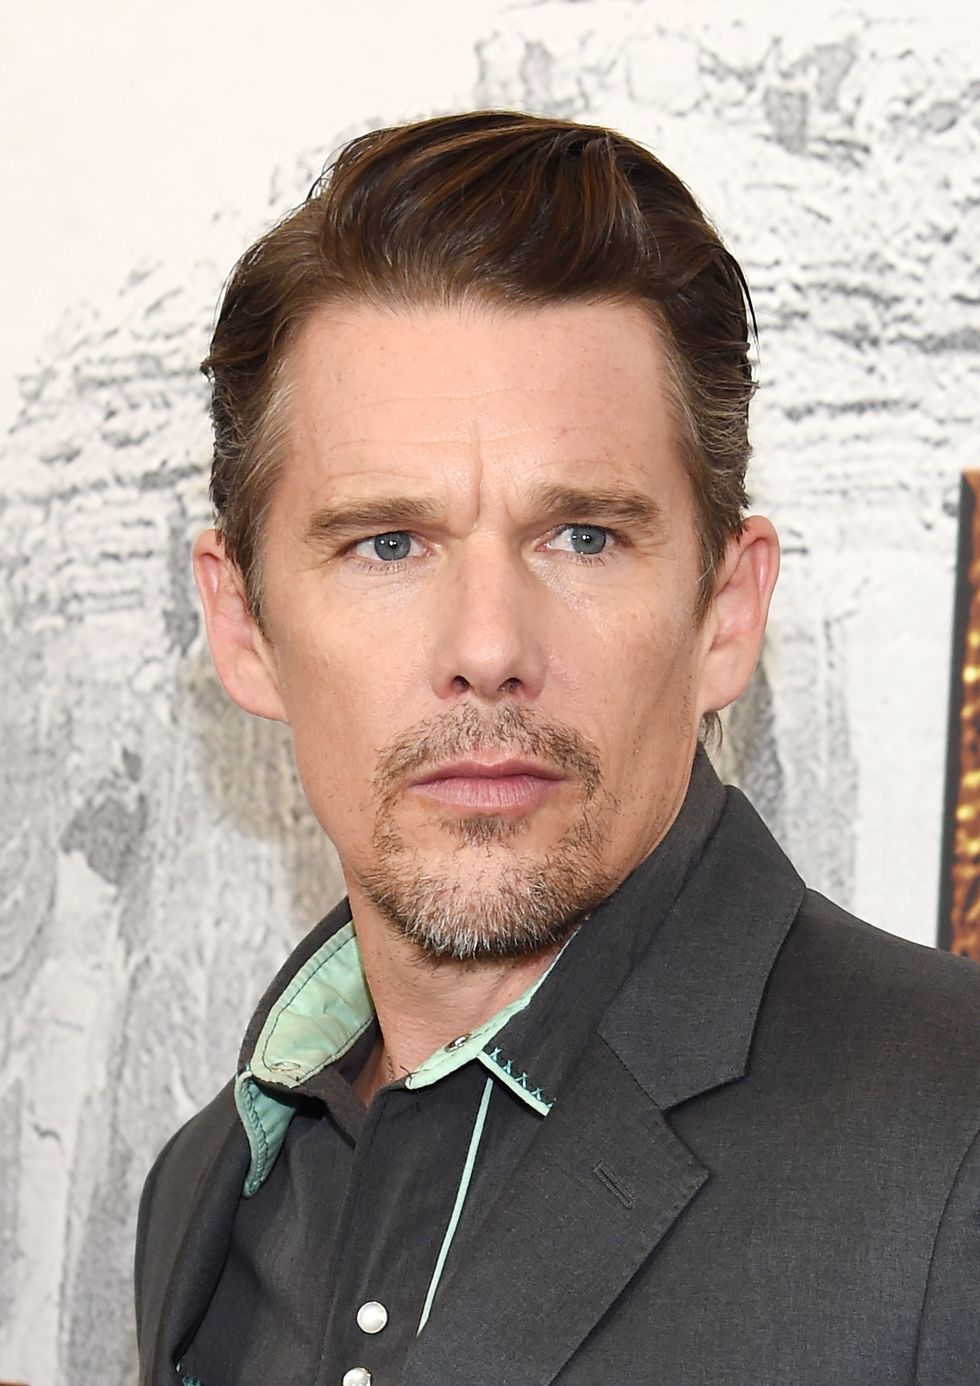 Ethan Hawke On Committing Onscreen Violence, His Daughter Becoming An ...